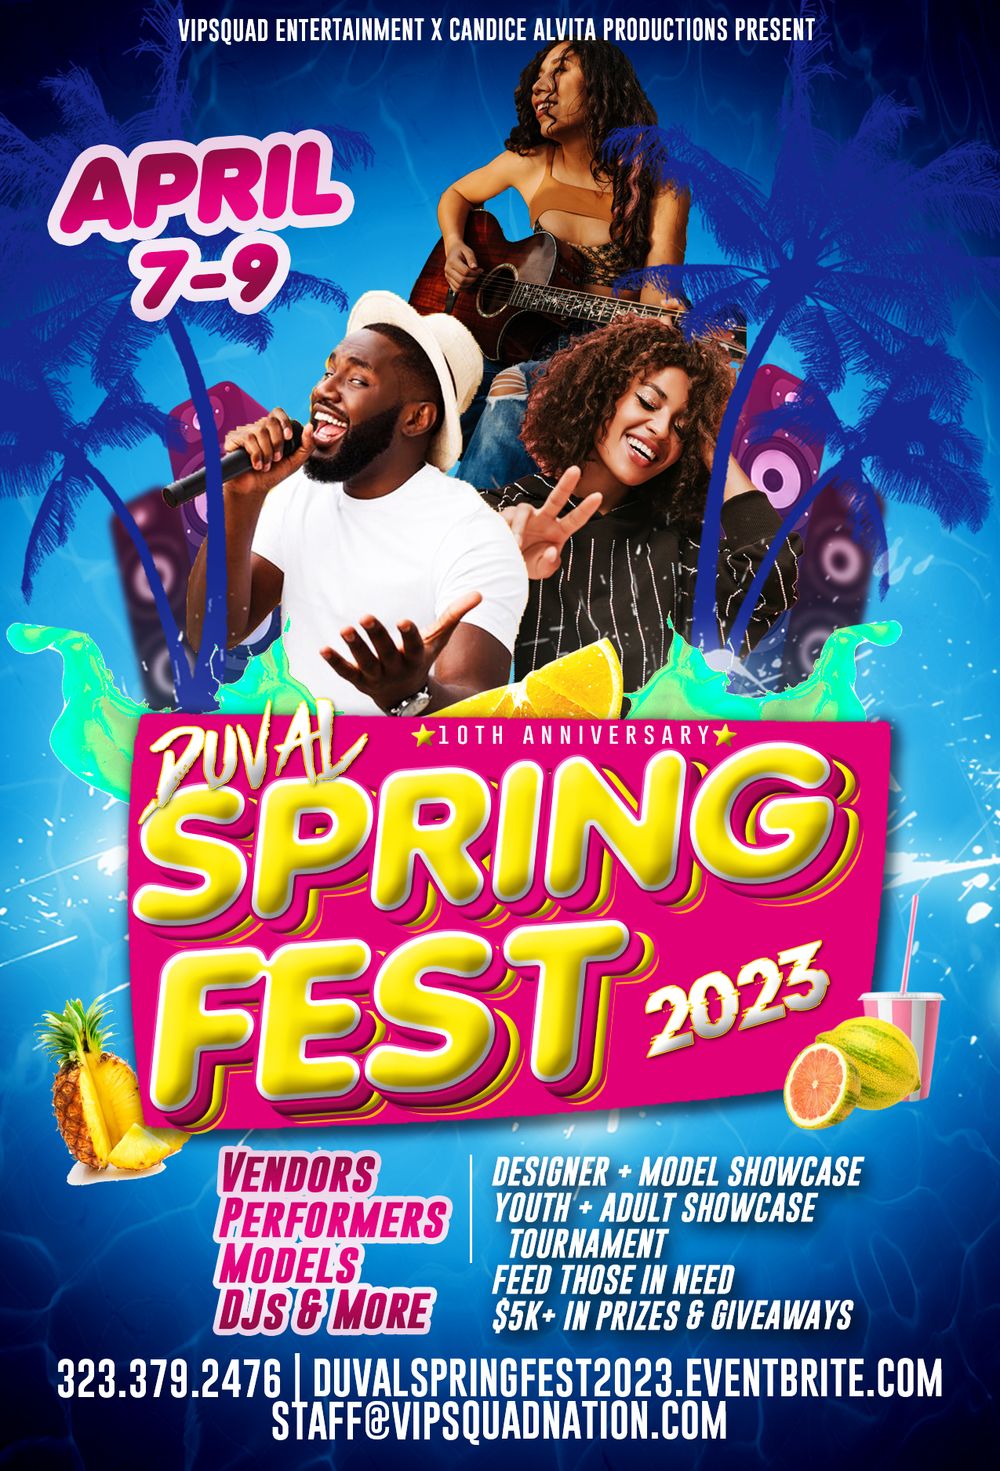 Duval Spring Fest, springfest, jacksonville events, fashion show, upcoming events